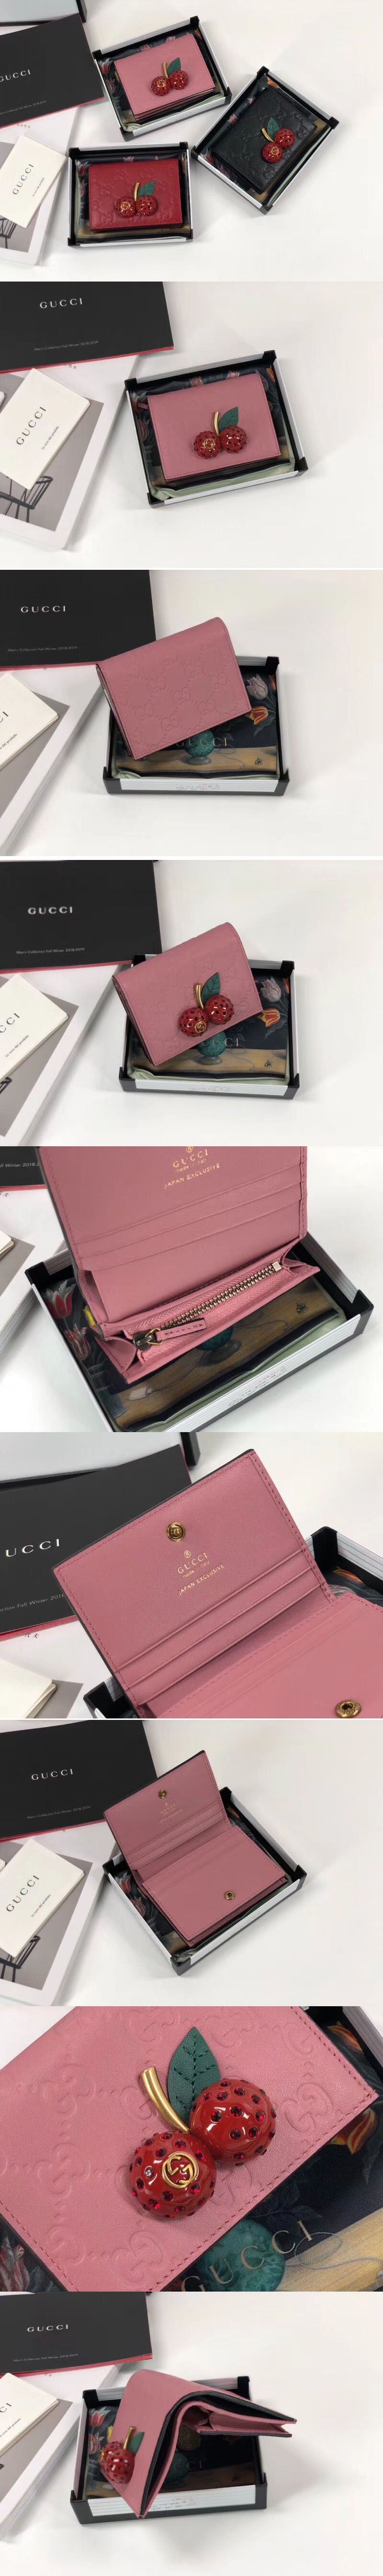 Replica Gucci Signature card case with cherries 476050 pink